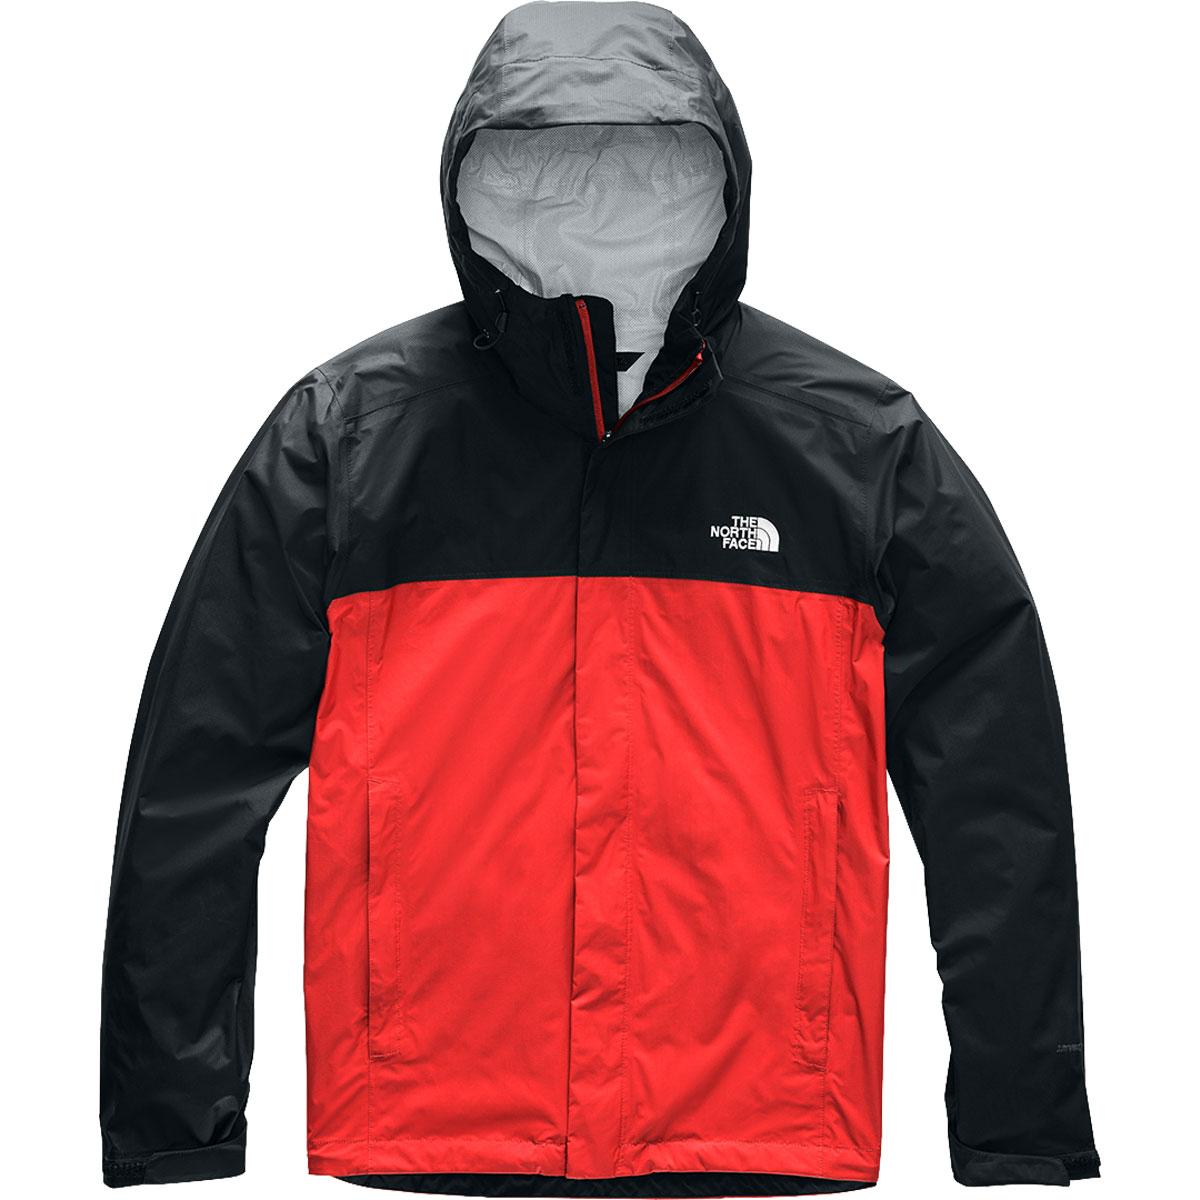 The North Face Mens Venture 2 Jacket for $69.95 Shipped